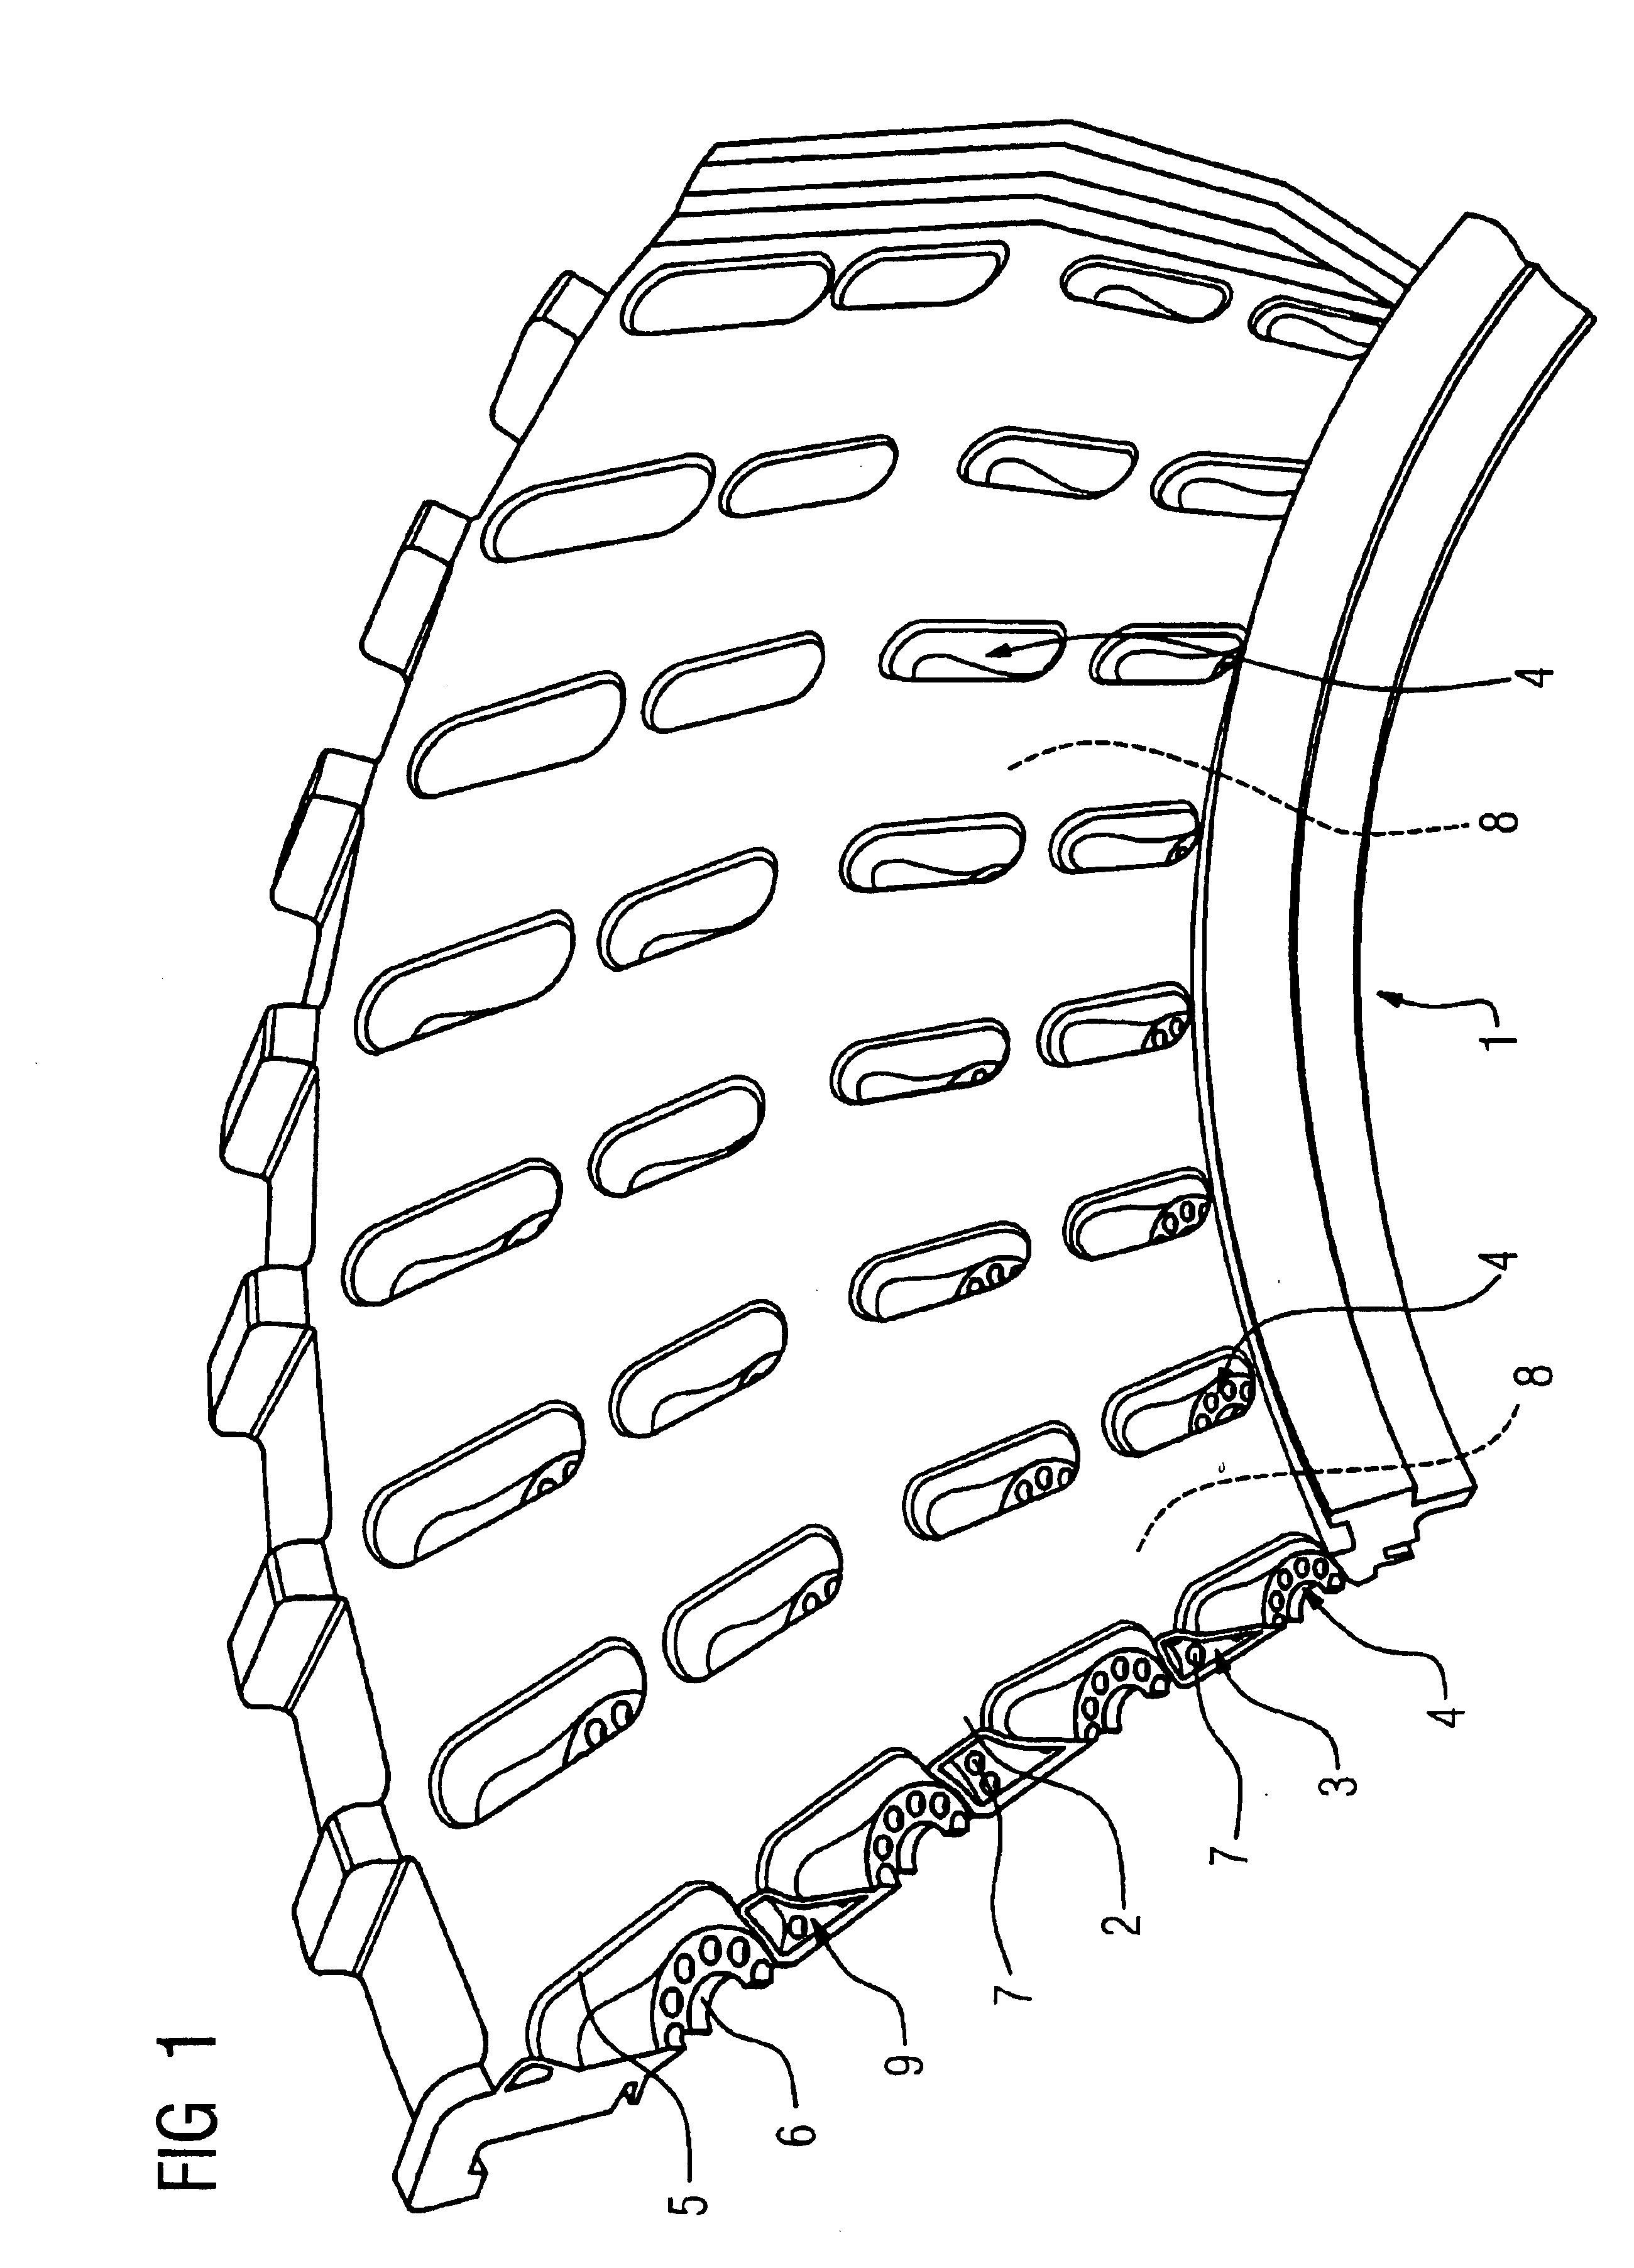 Combustion chamber with a closed cooling system for a turbine